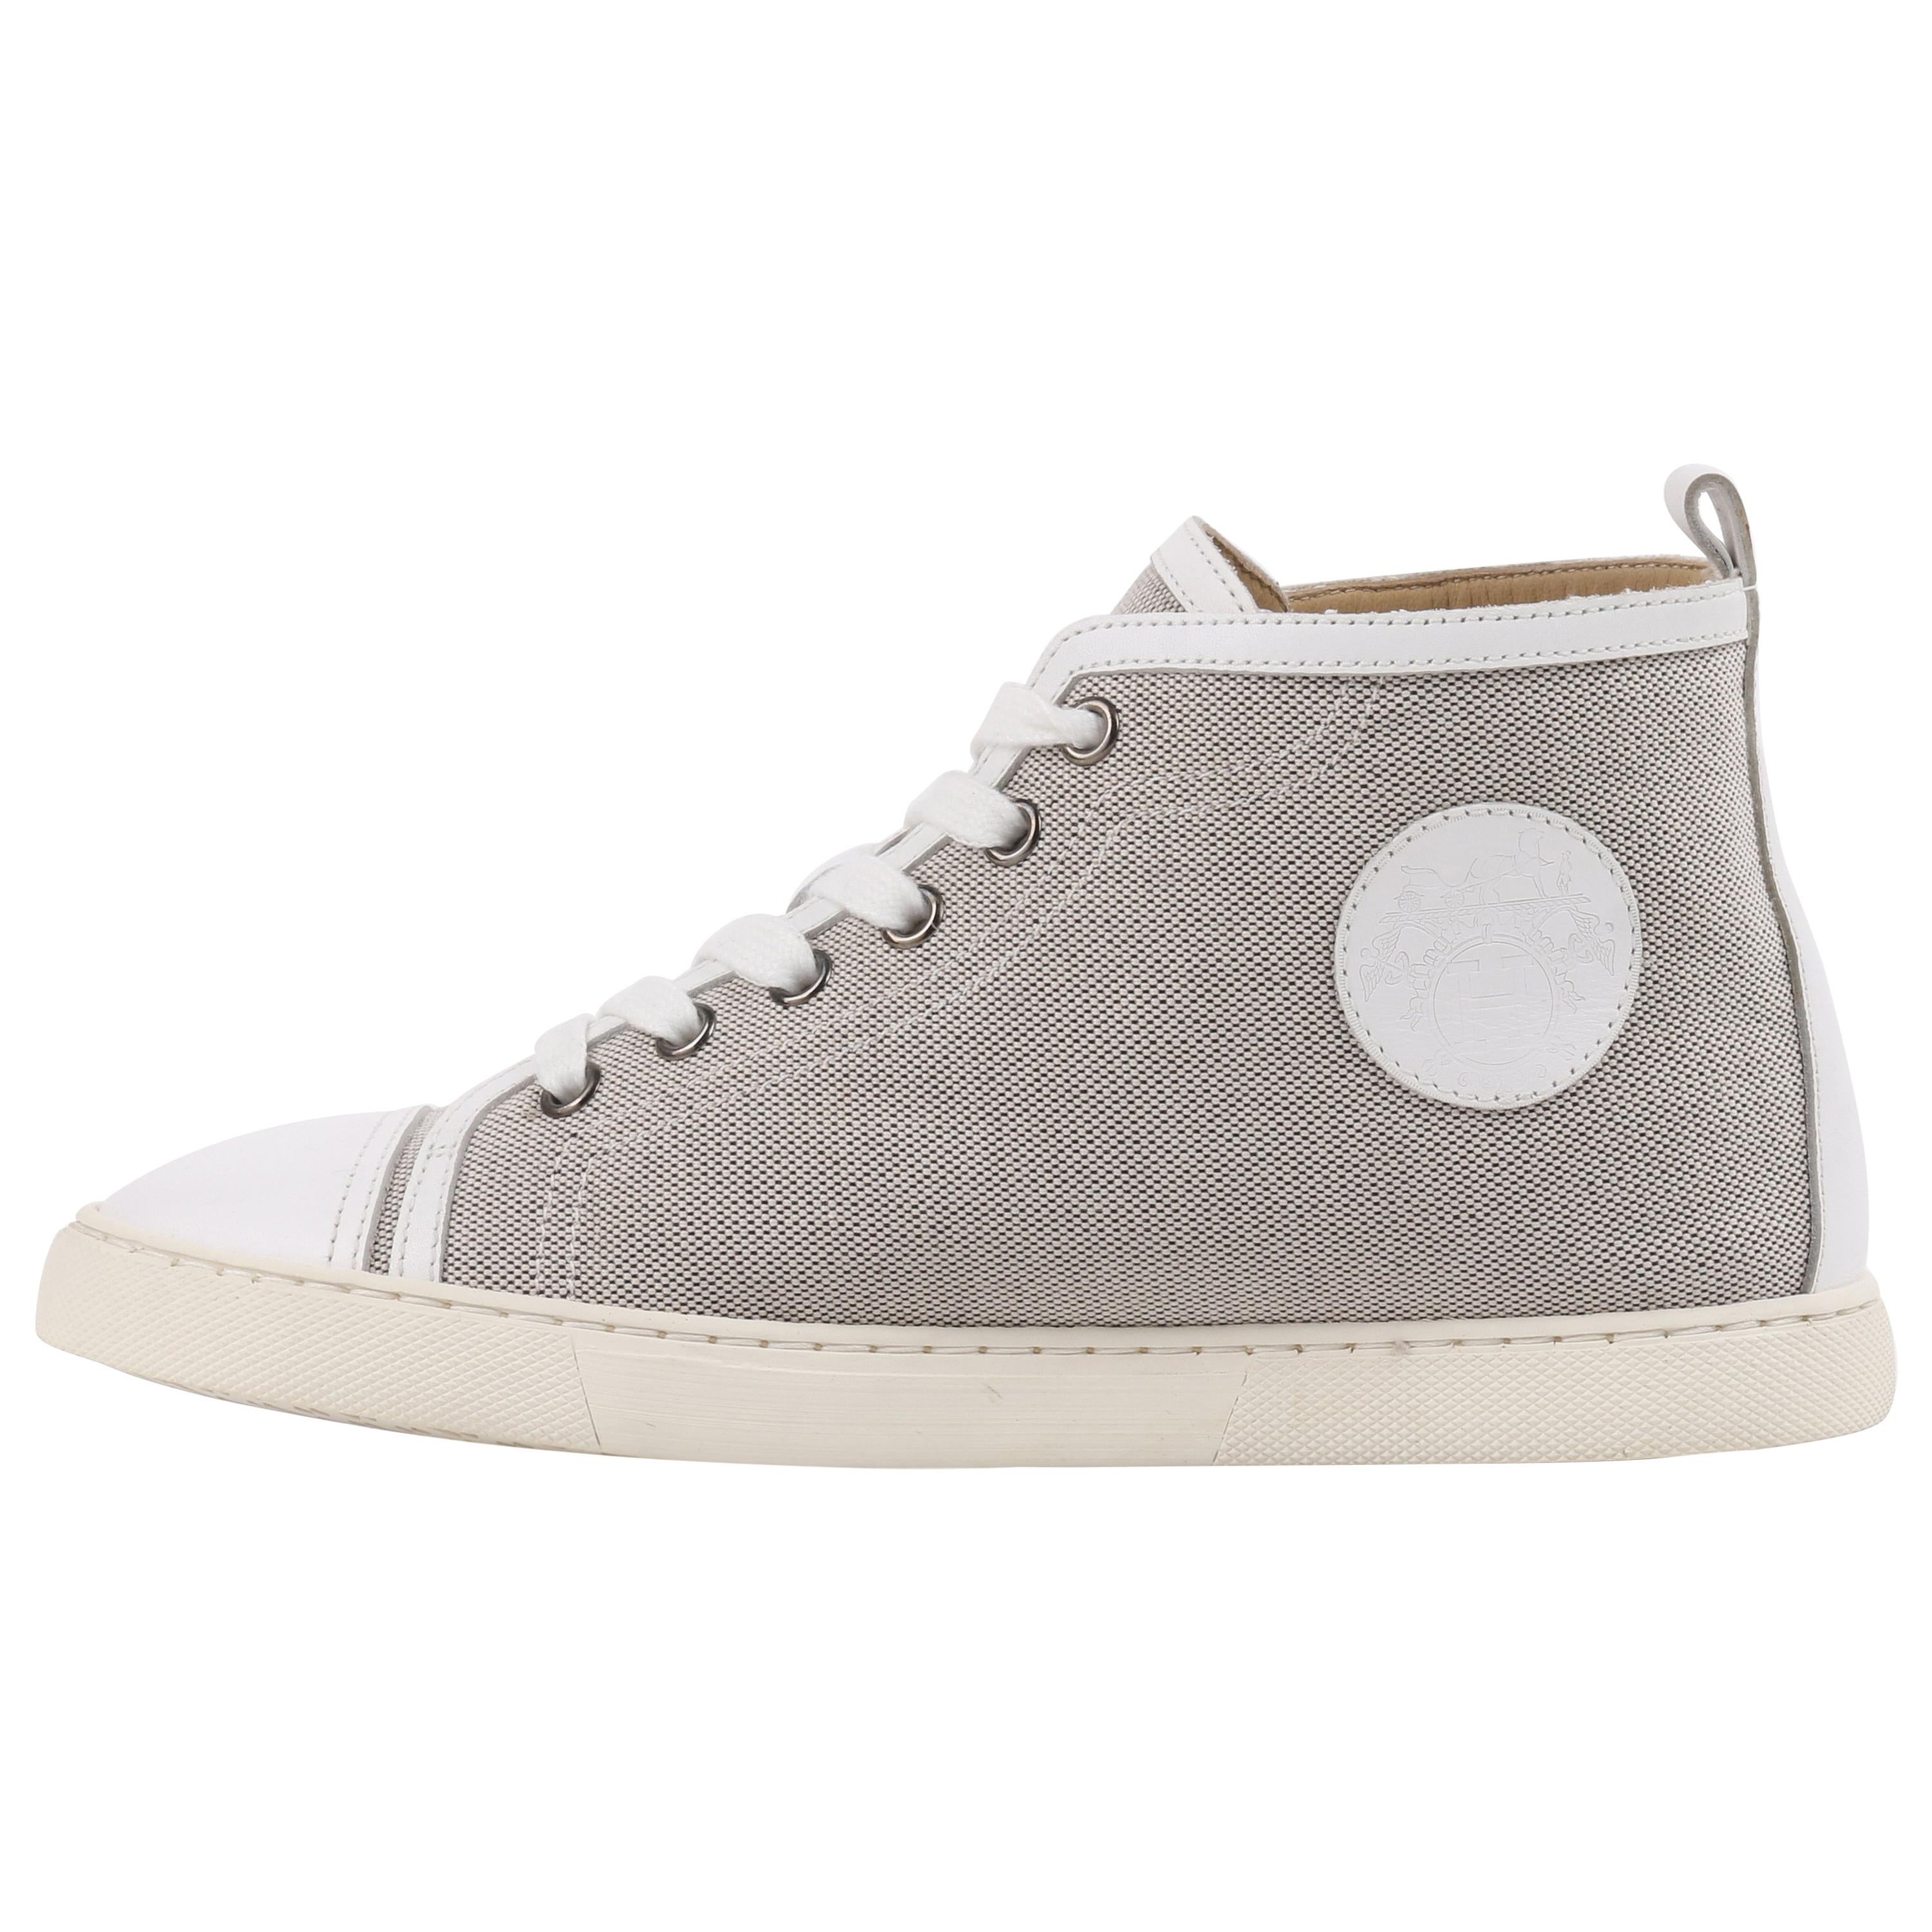 HERMES Canvas Libris" Jimmy Escutcheon Lace Up High Top Sneaker Shoes at 1stDibs | hermes jimmy sneakers, sneakers, hermes high top sneakers